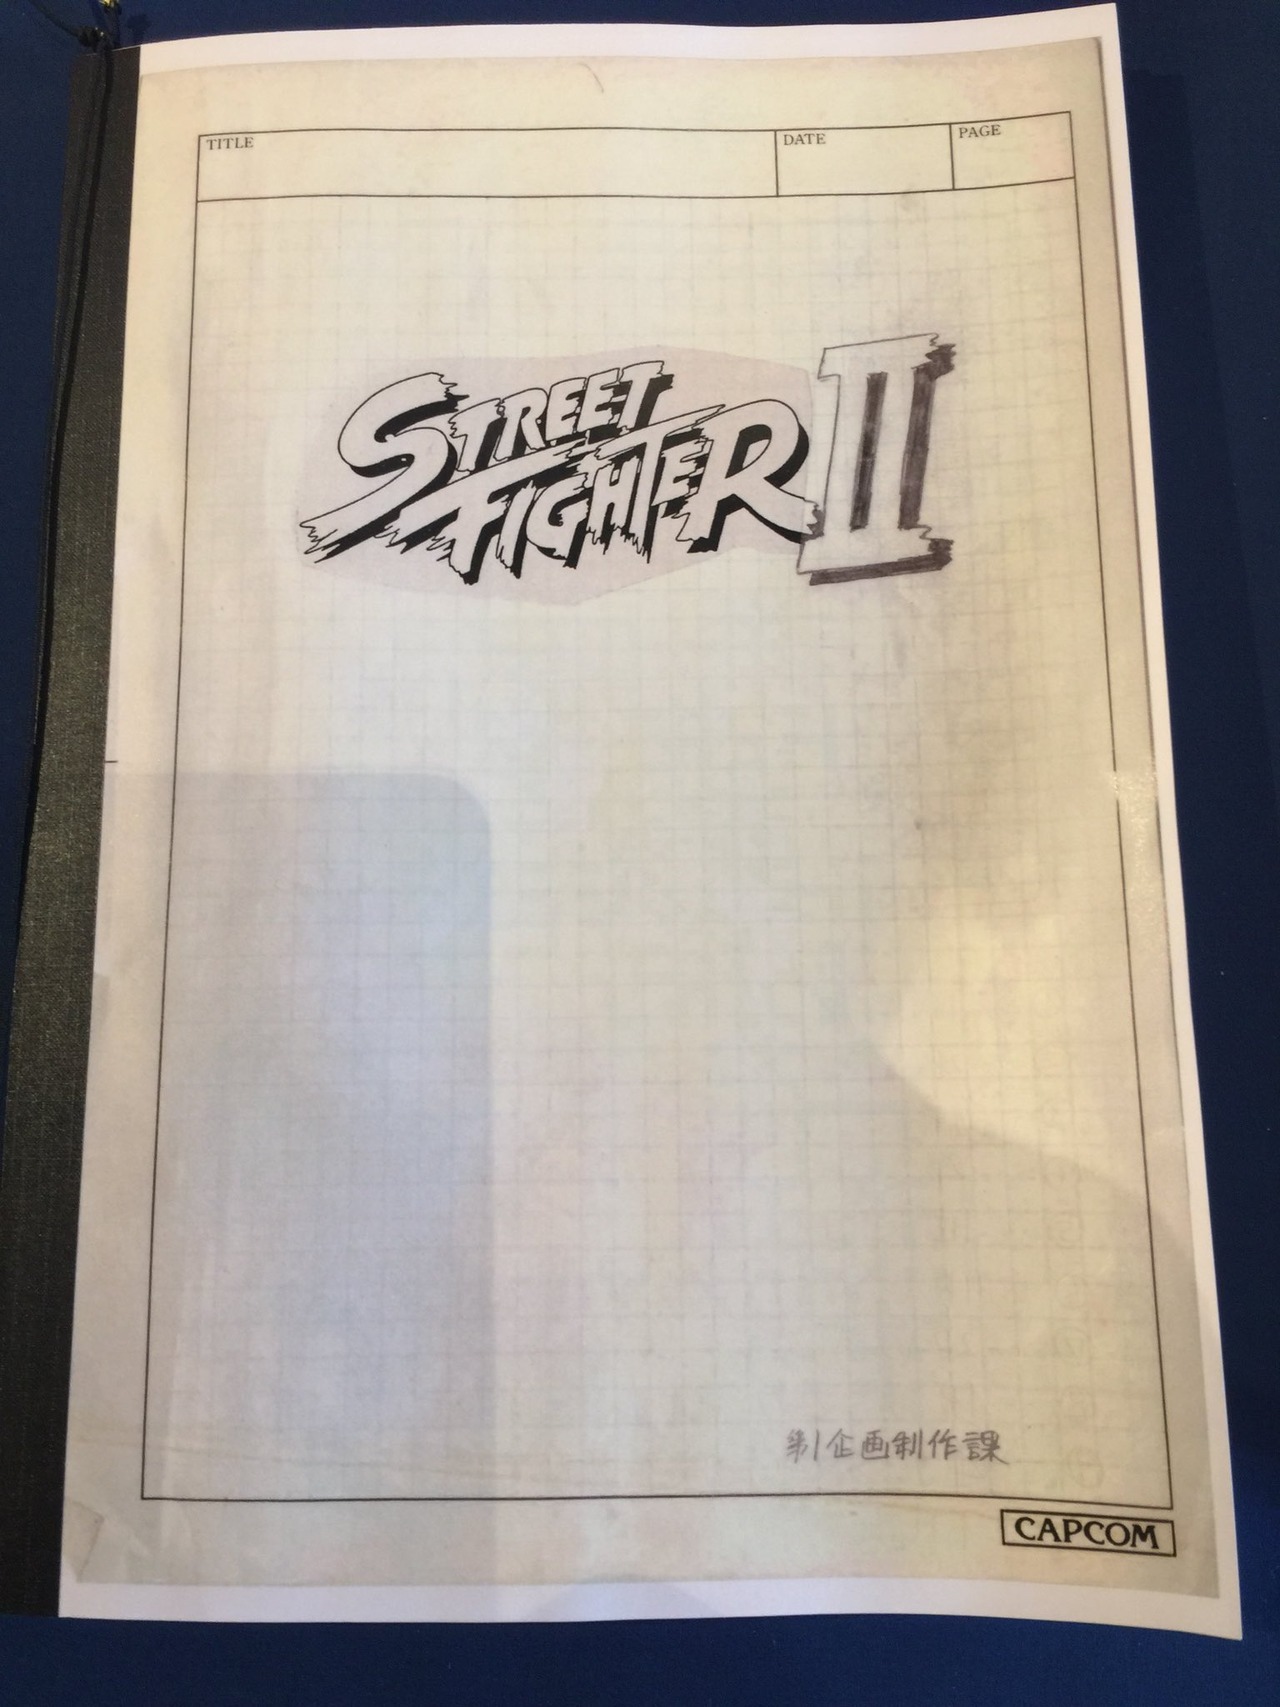 A reproduction of the Street Fighter II design doc is currently exhibited at the Saga exhibition shop. Sources: https://twitter.com/infinityzero_/status/955735308221366272...